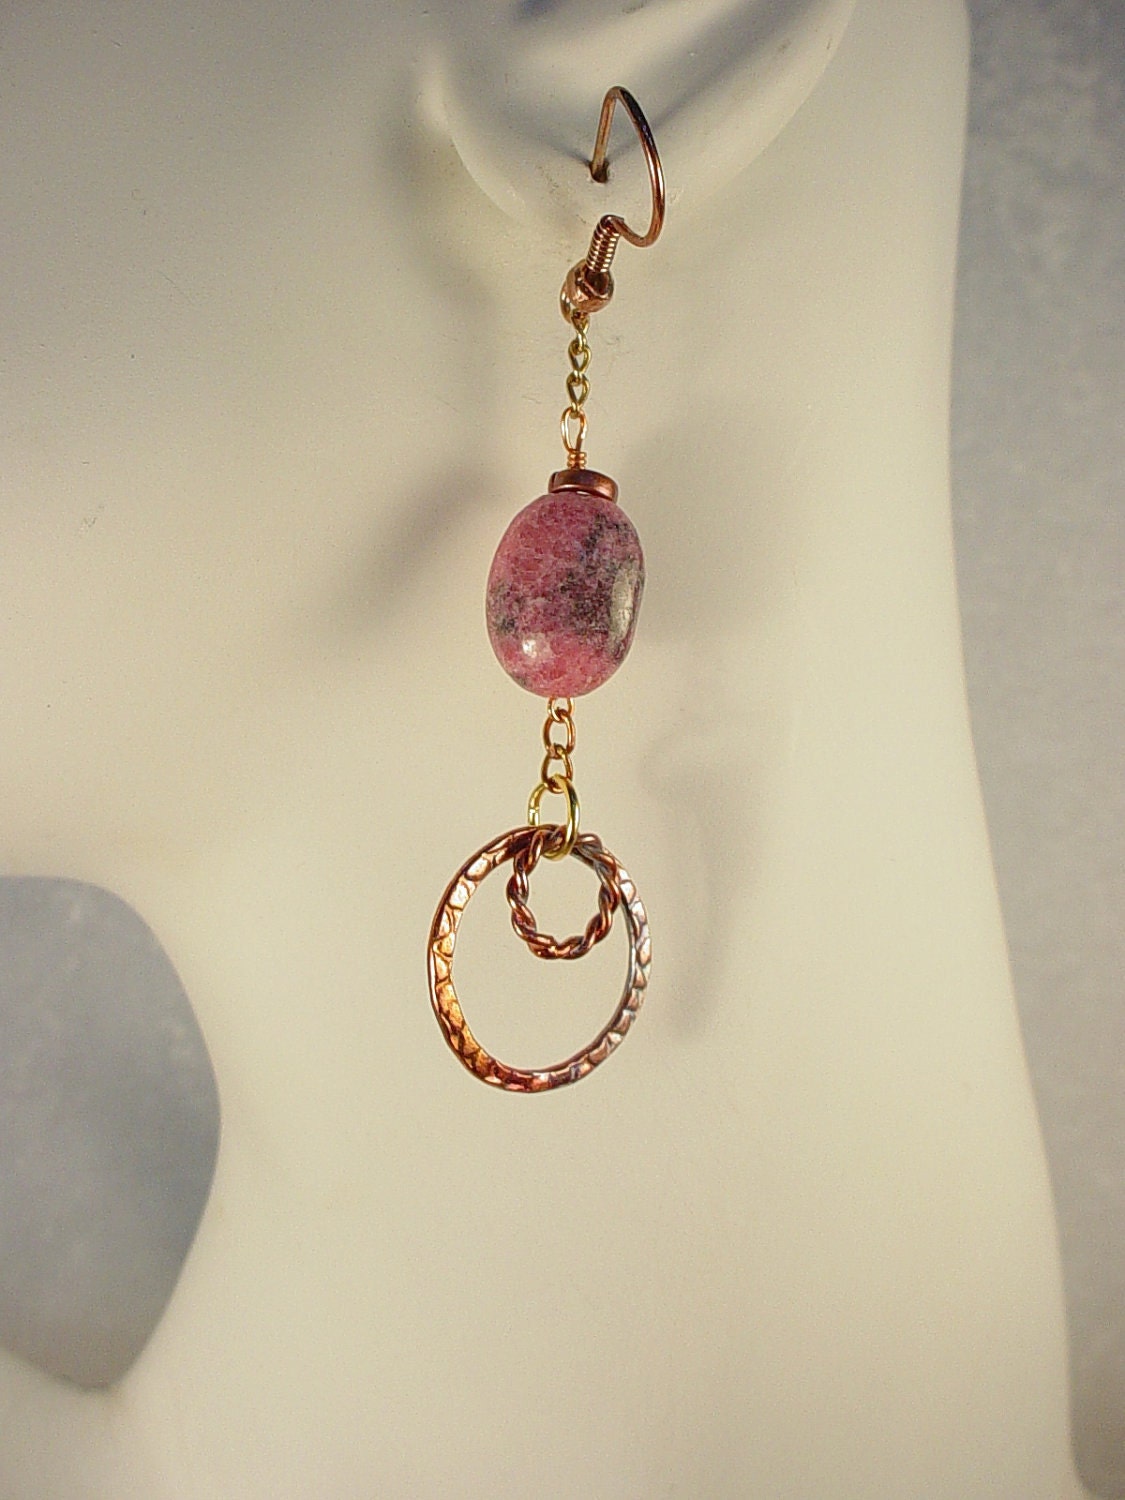 Copper Earrings Gold Bonded Torch Shimmered With Rhodonite - Etsy